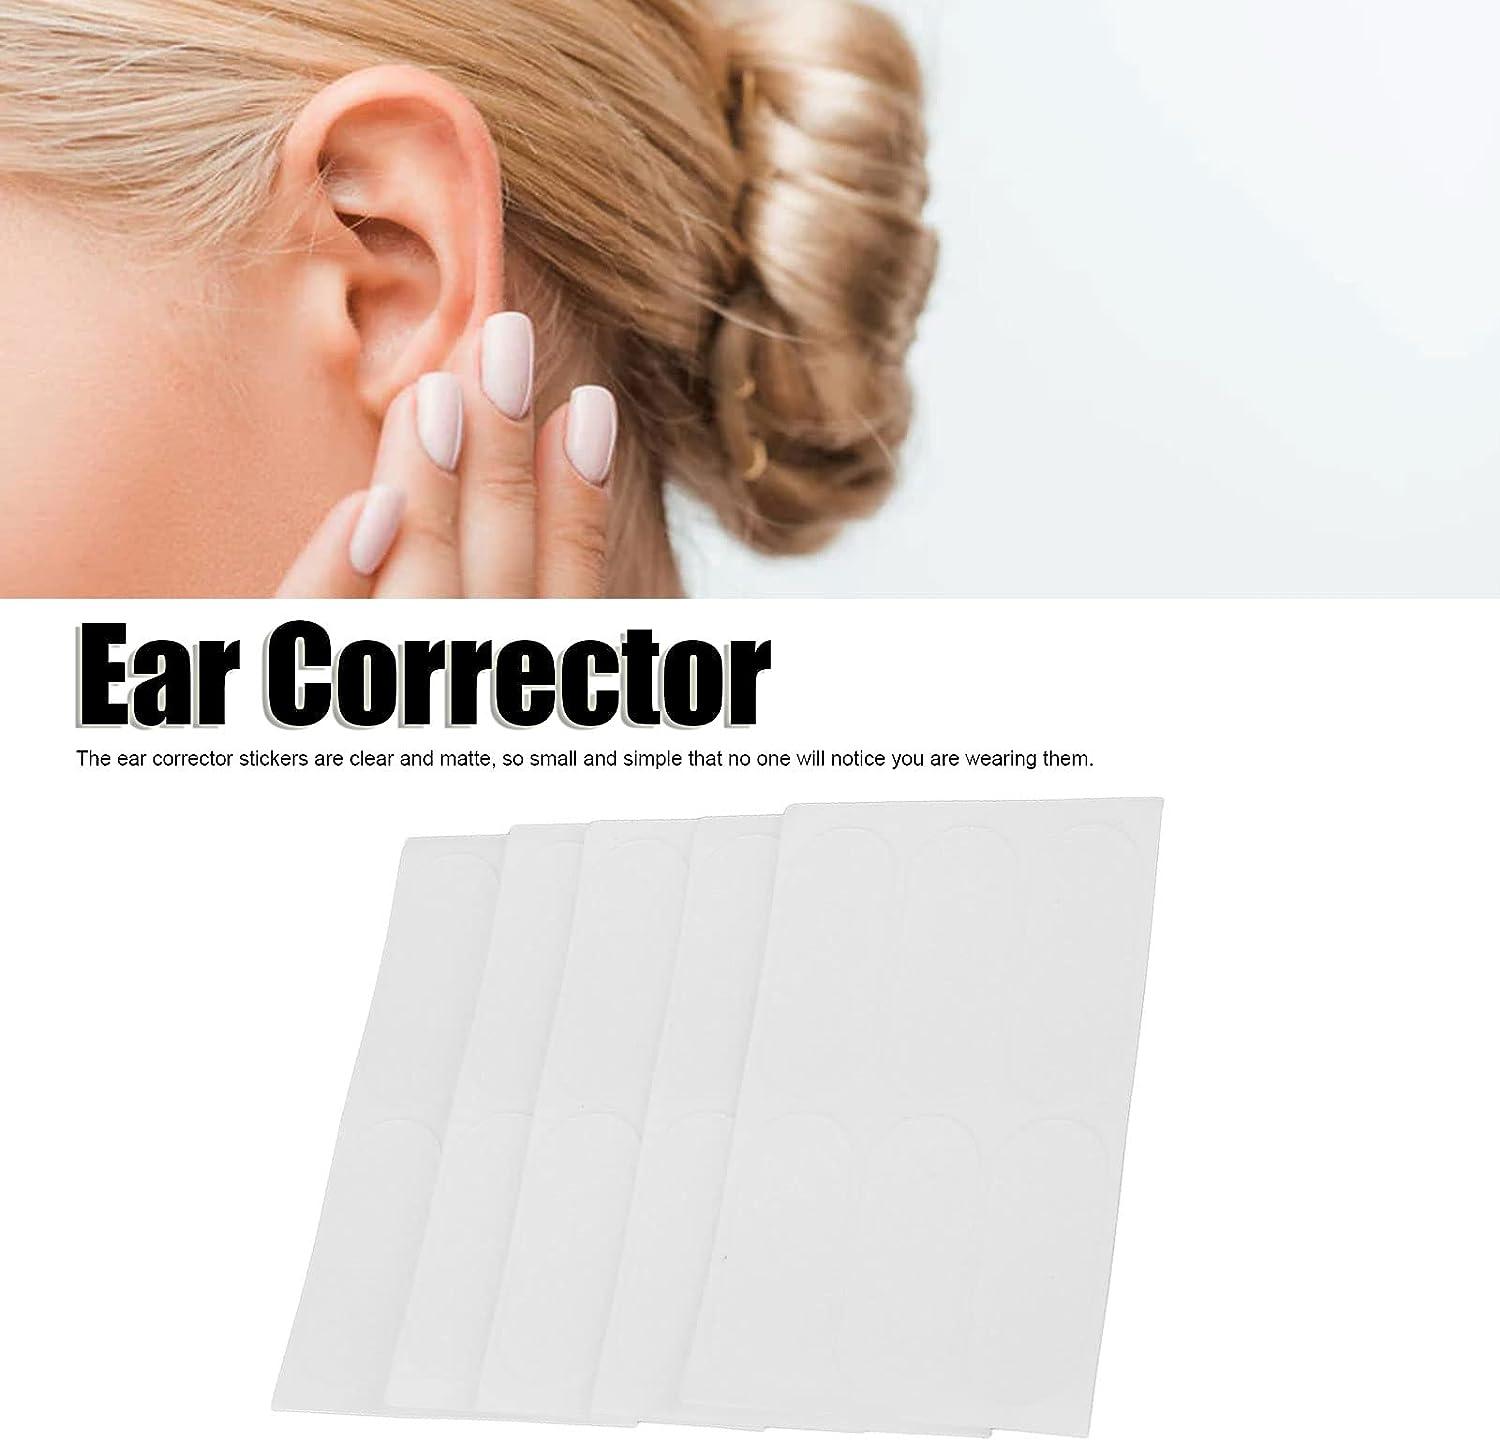 Ear Corrector Contain 30 Ear Tape Solve Big Ear Problem with Ear Stickers  by Pinning Back Ears Cosmetic Aesthetic Correctors for Prominent Ears  Waterproof Ear Correctors Sticks for Adults